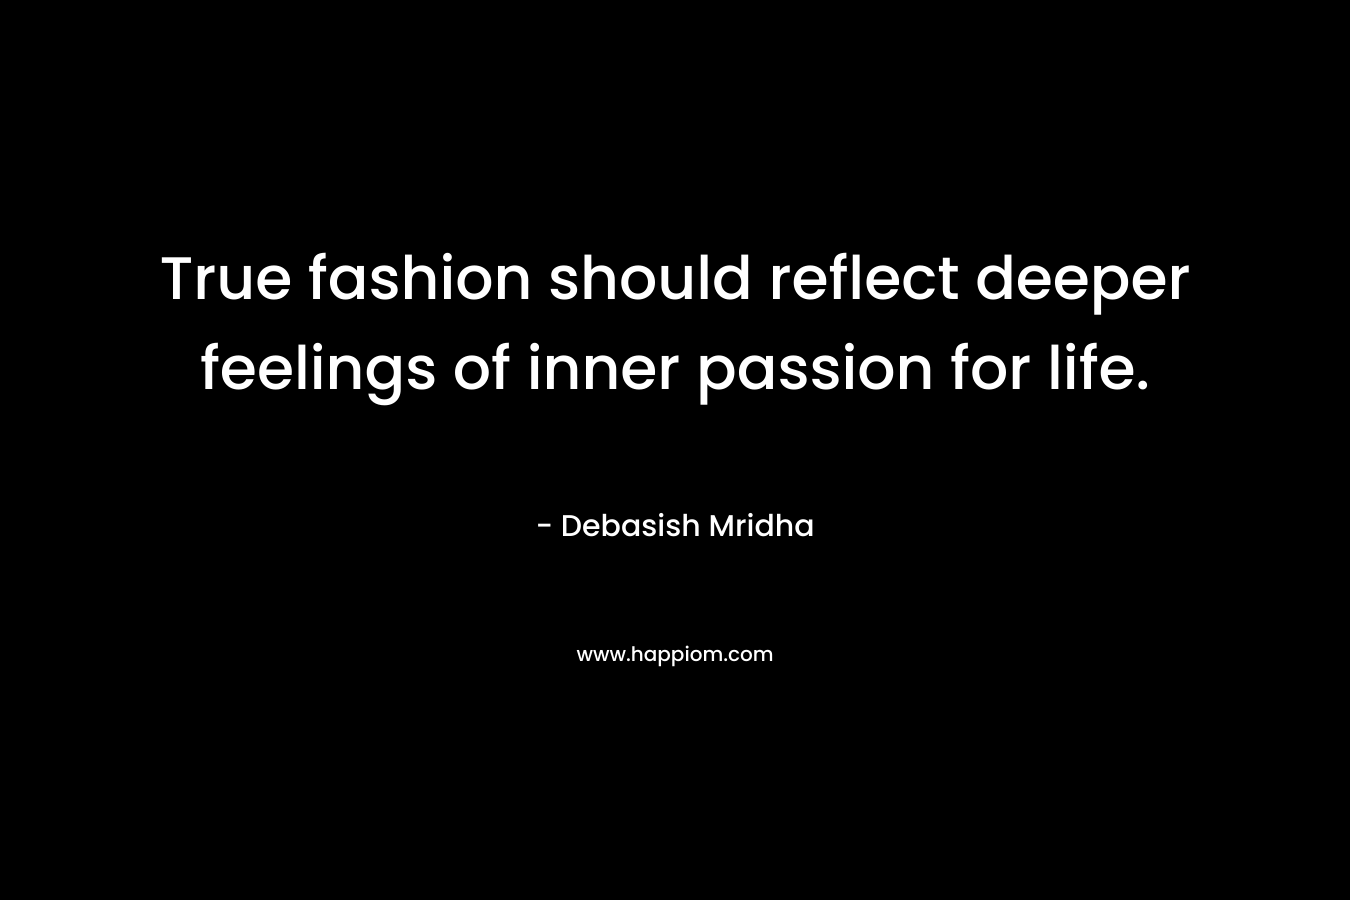 True fashion should reflect deeper feelings of inner passion for life.